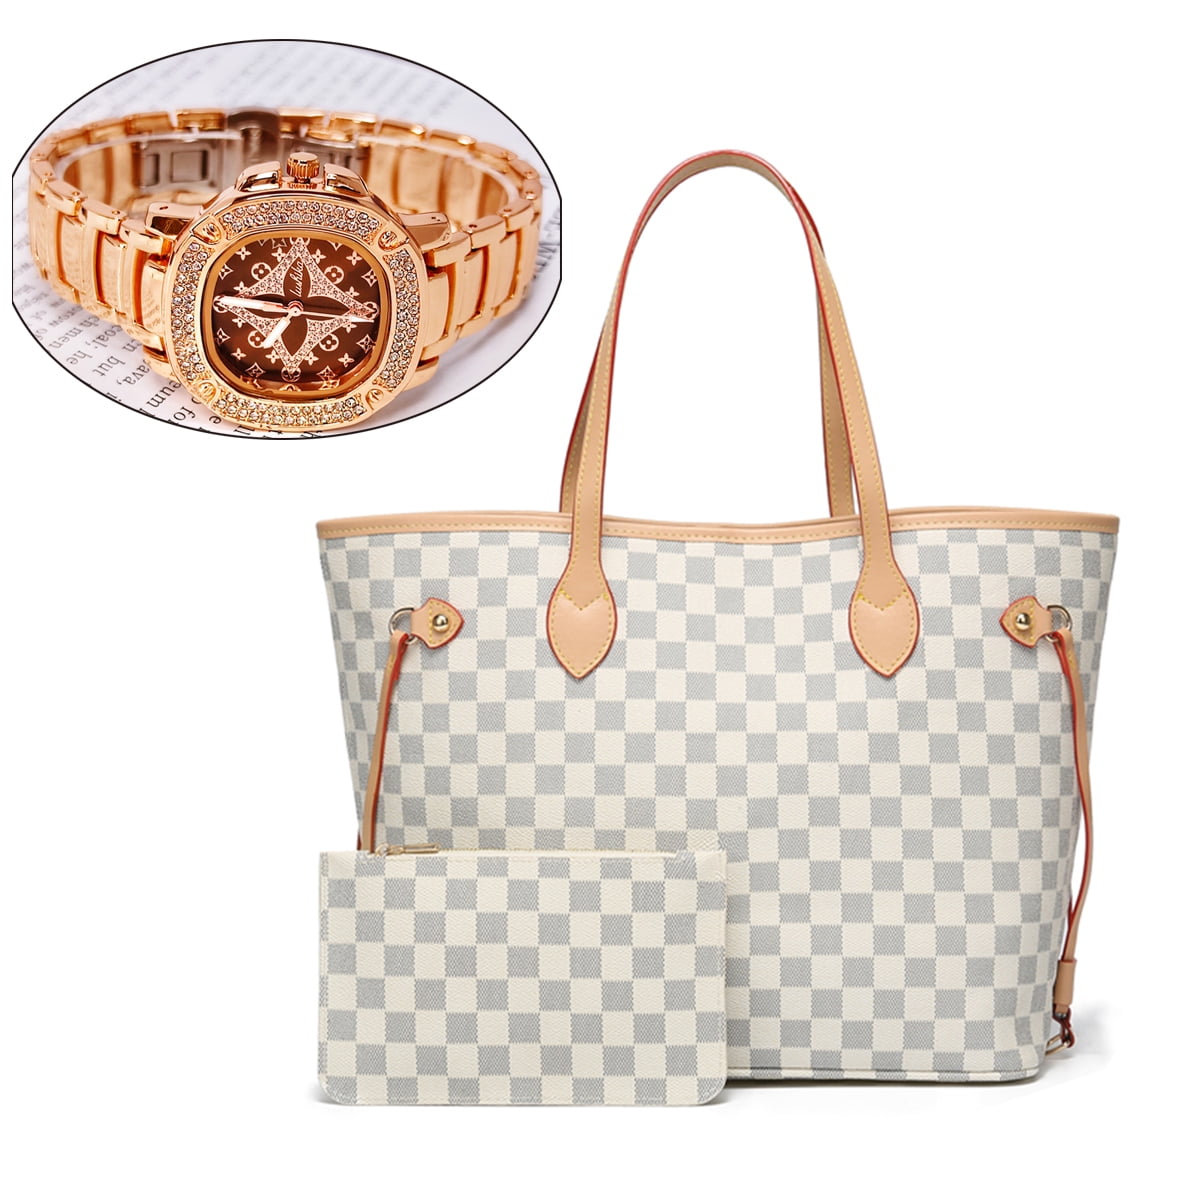 RICHPORTS 2PCS Bag Set Checkered Tote Shoulder Bags With Women's Rose Gold  Tone Bracelet Watch